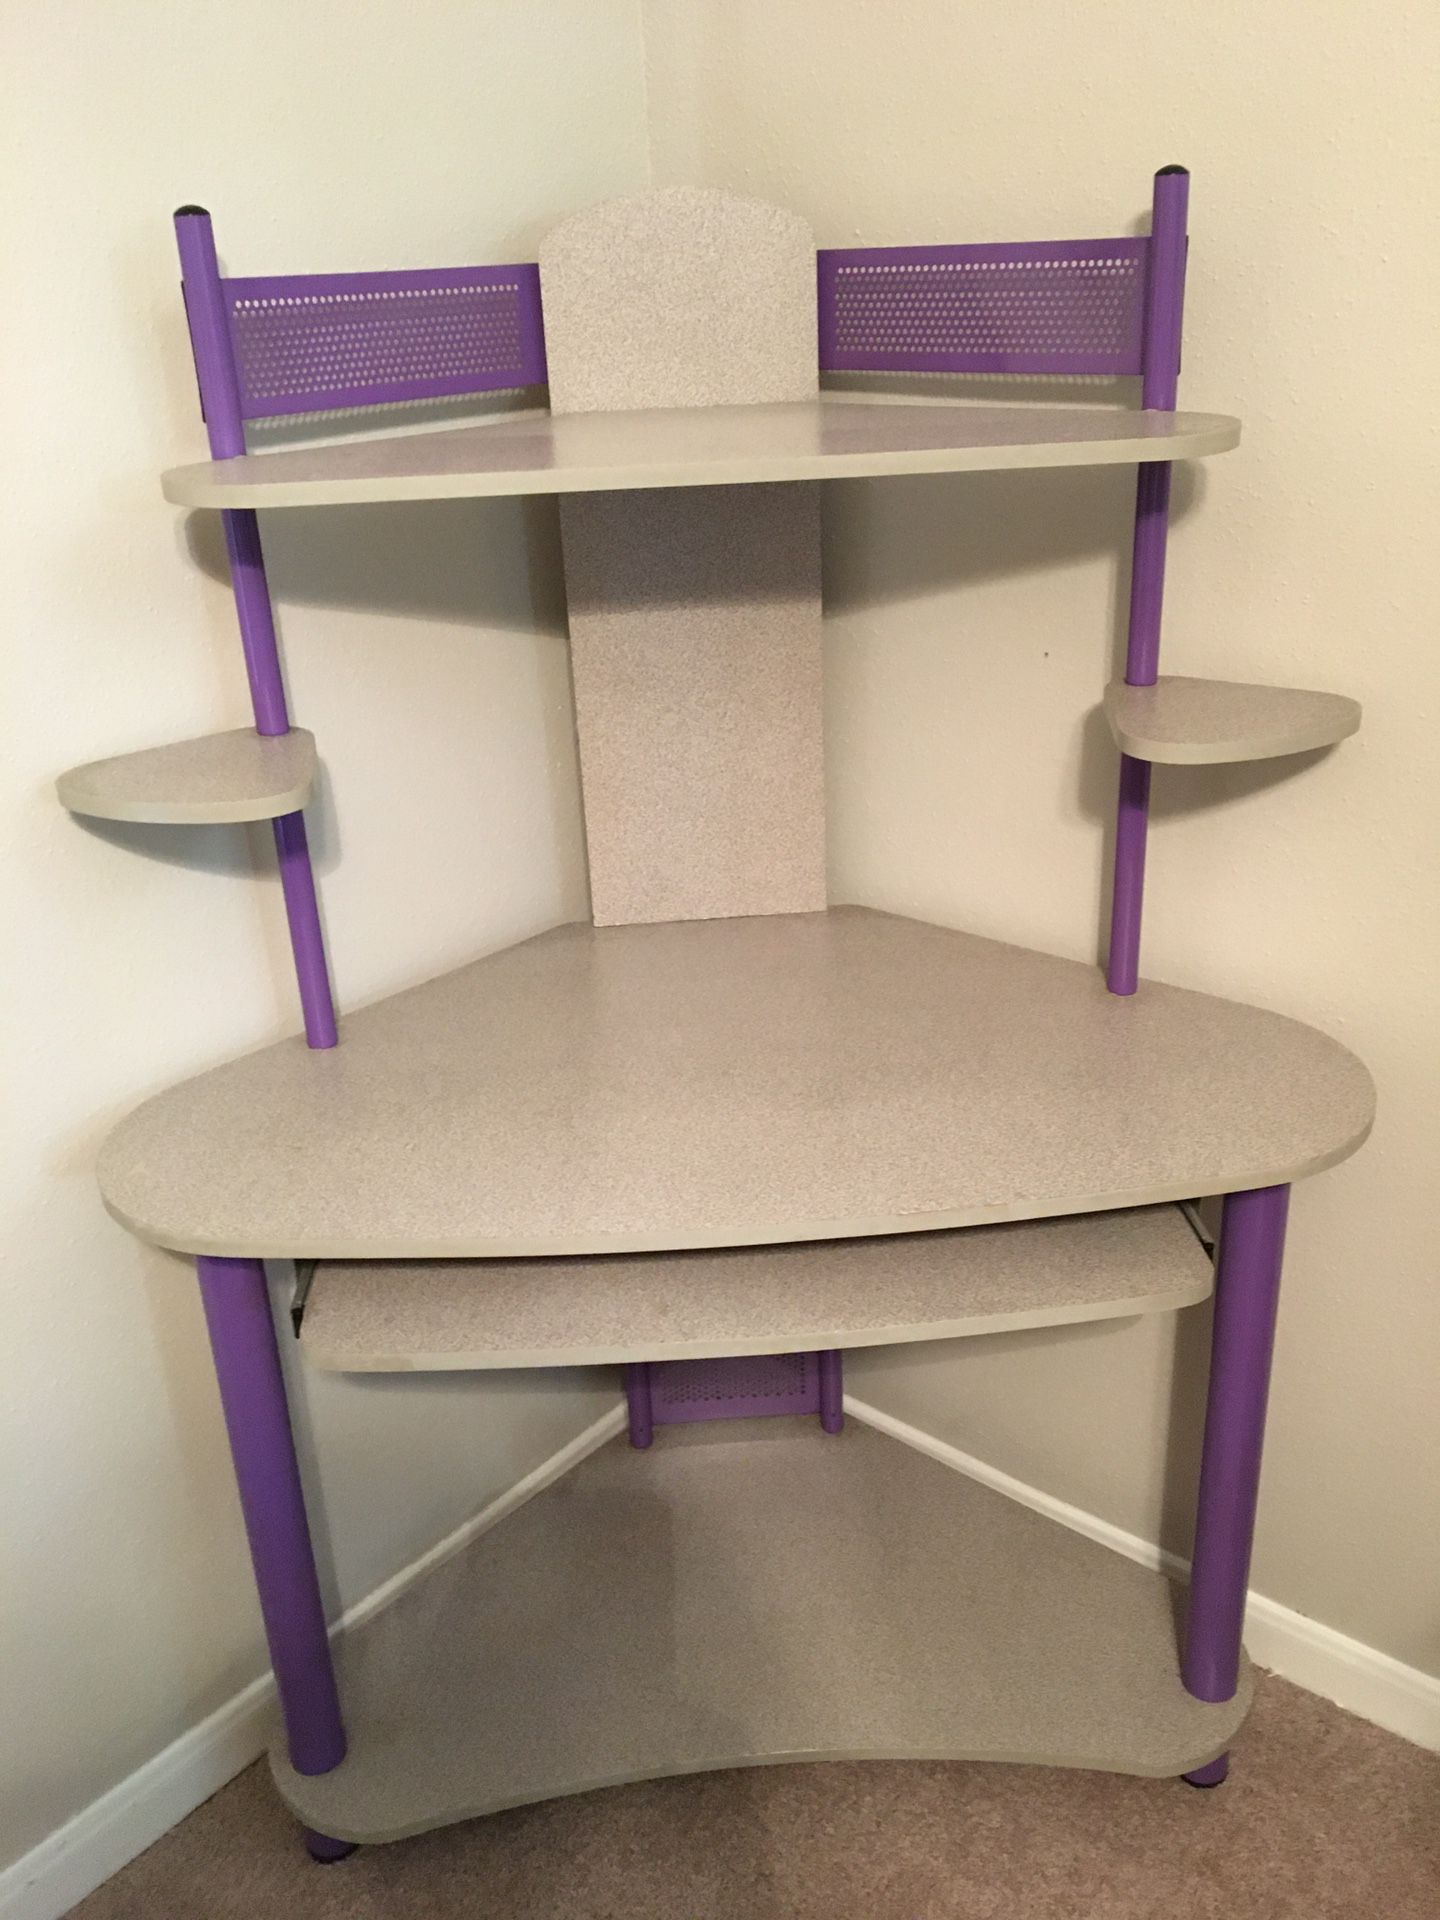 Small corner desk with shelving for peripherals